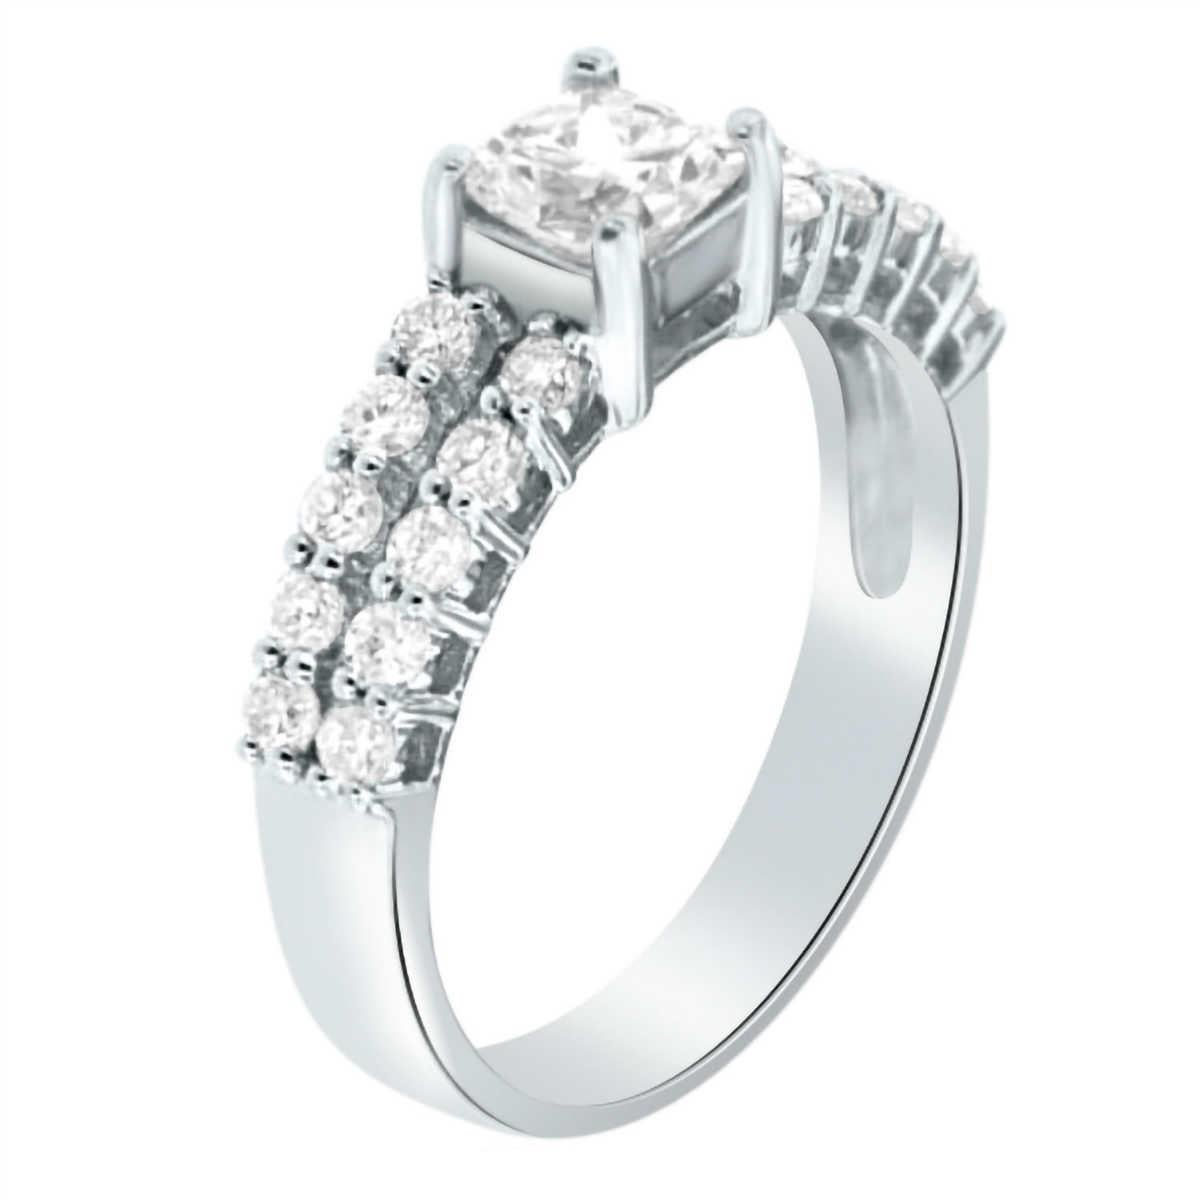 This 18K White Gold handcrafted Women's engagement ring showcases a 0.65 carat GIA Certified Cushion Cut diamond accompanied by twenty (20) Round Brilliant Cut diamonds on a split shank setting.

Center Diamond Weight: 0.70 Carats
Center Diamond